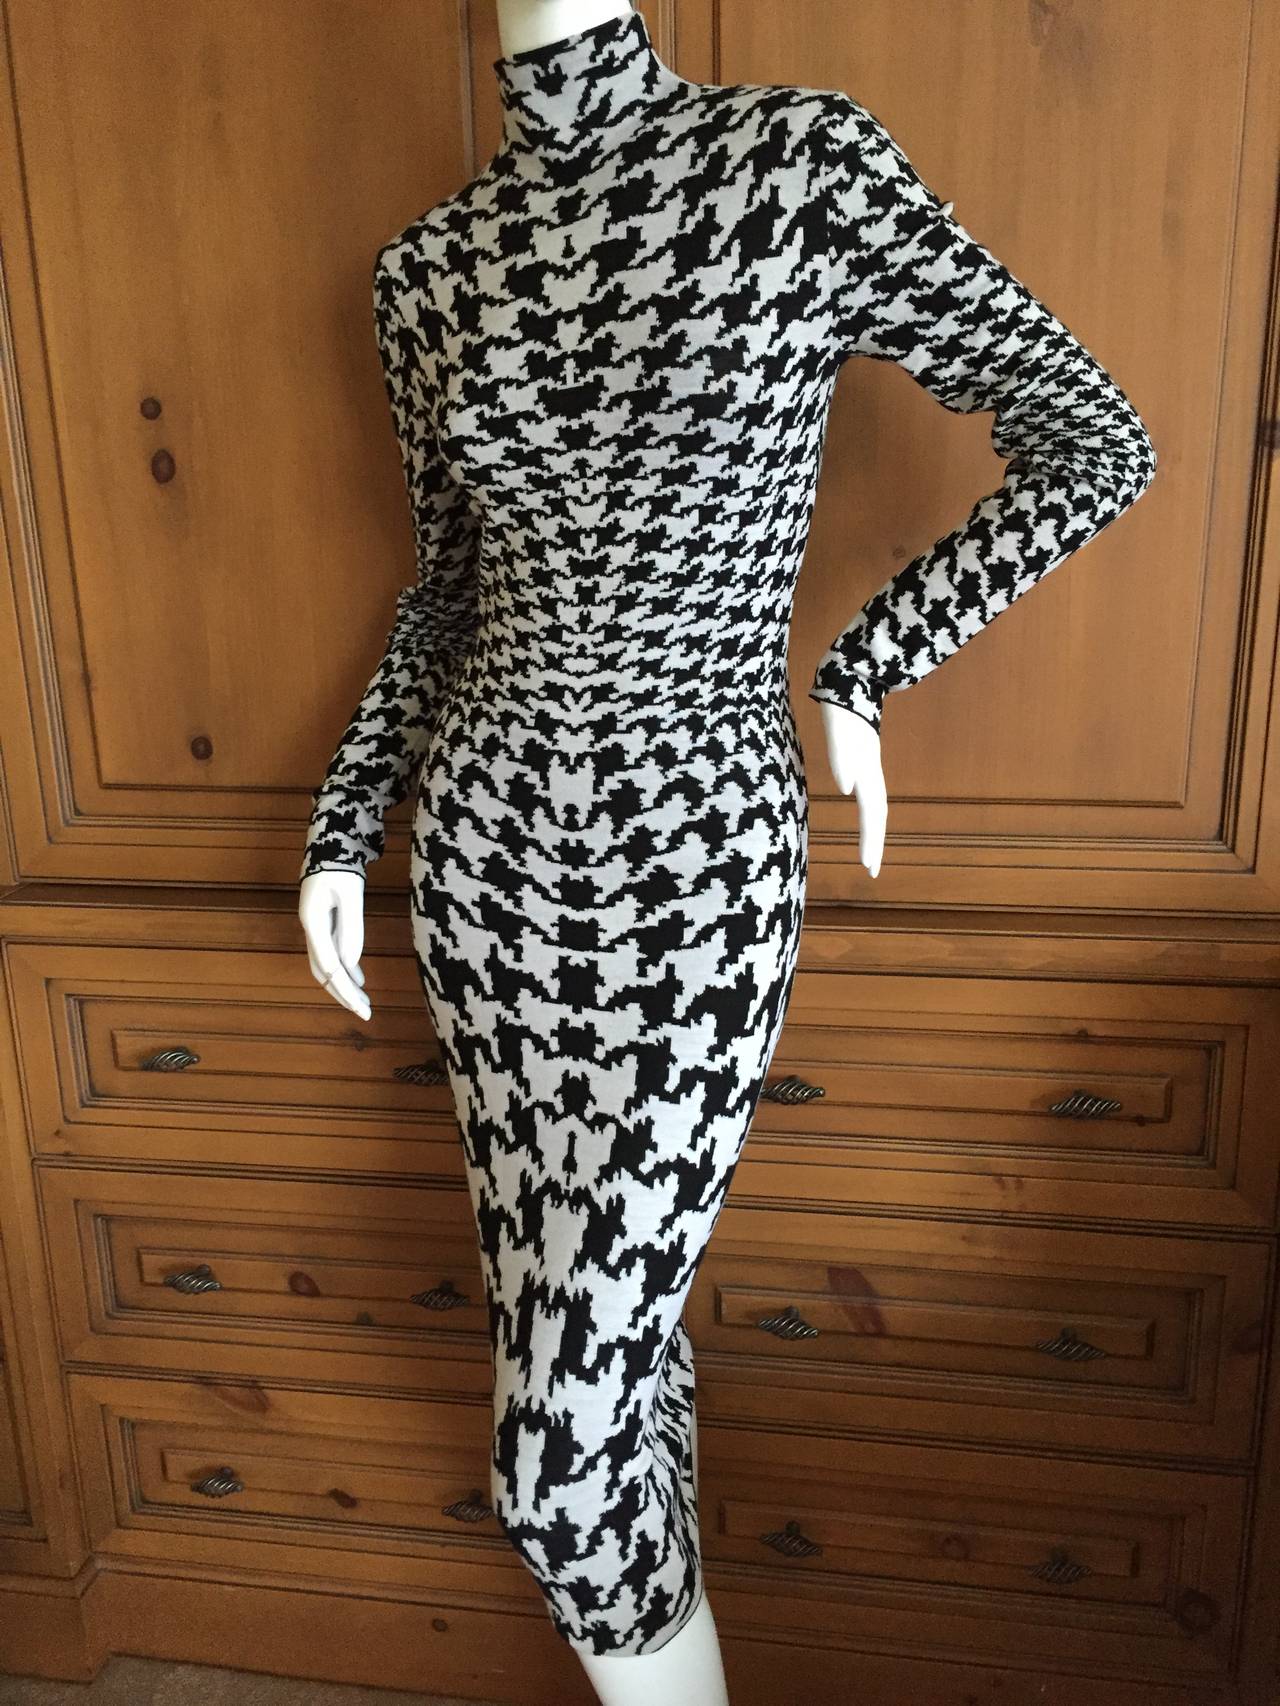 Delightful exaggerated houndstooth print jersey dress from Alexander McQueen , Fall 2009.
Wool jersey feels like cashmere.
Zipper along shoulder.
Size Small
There is a lot of stretch in this fabric.
Bust 36